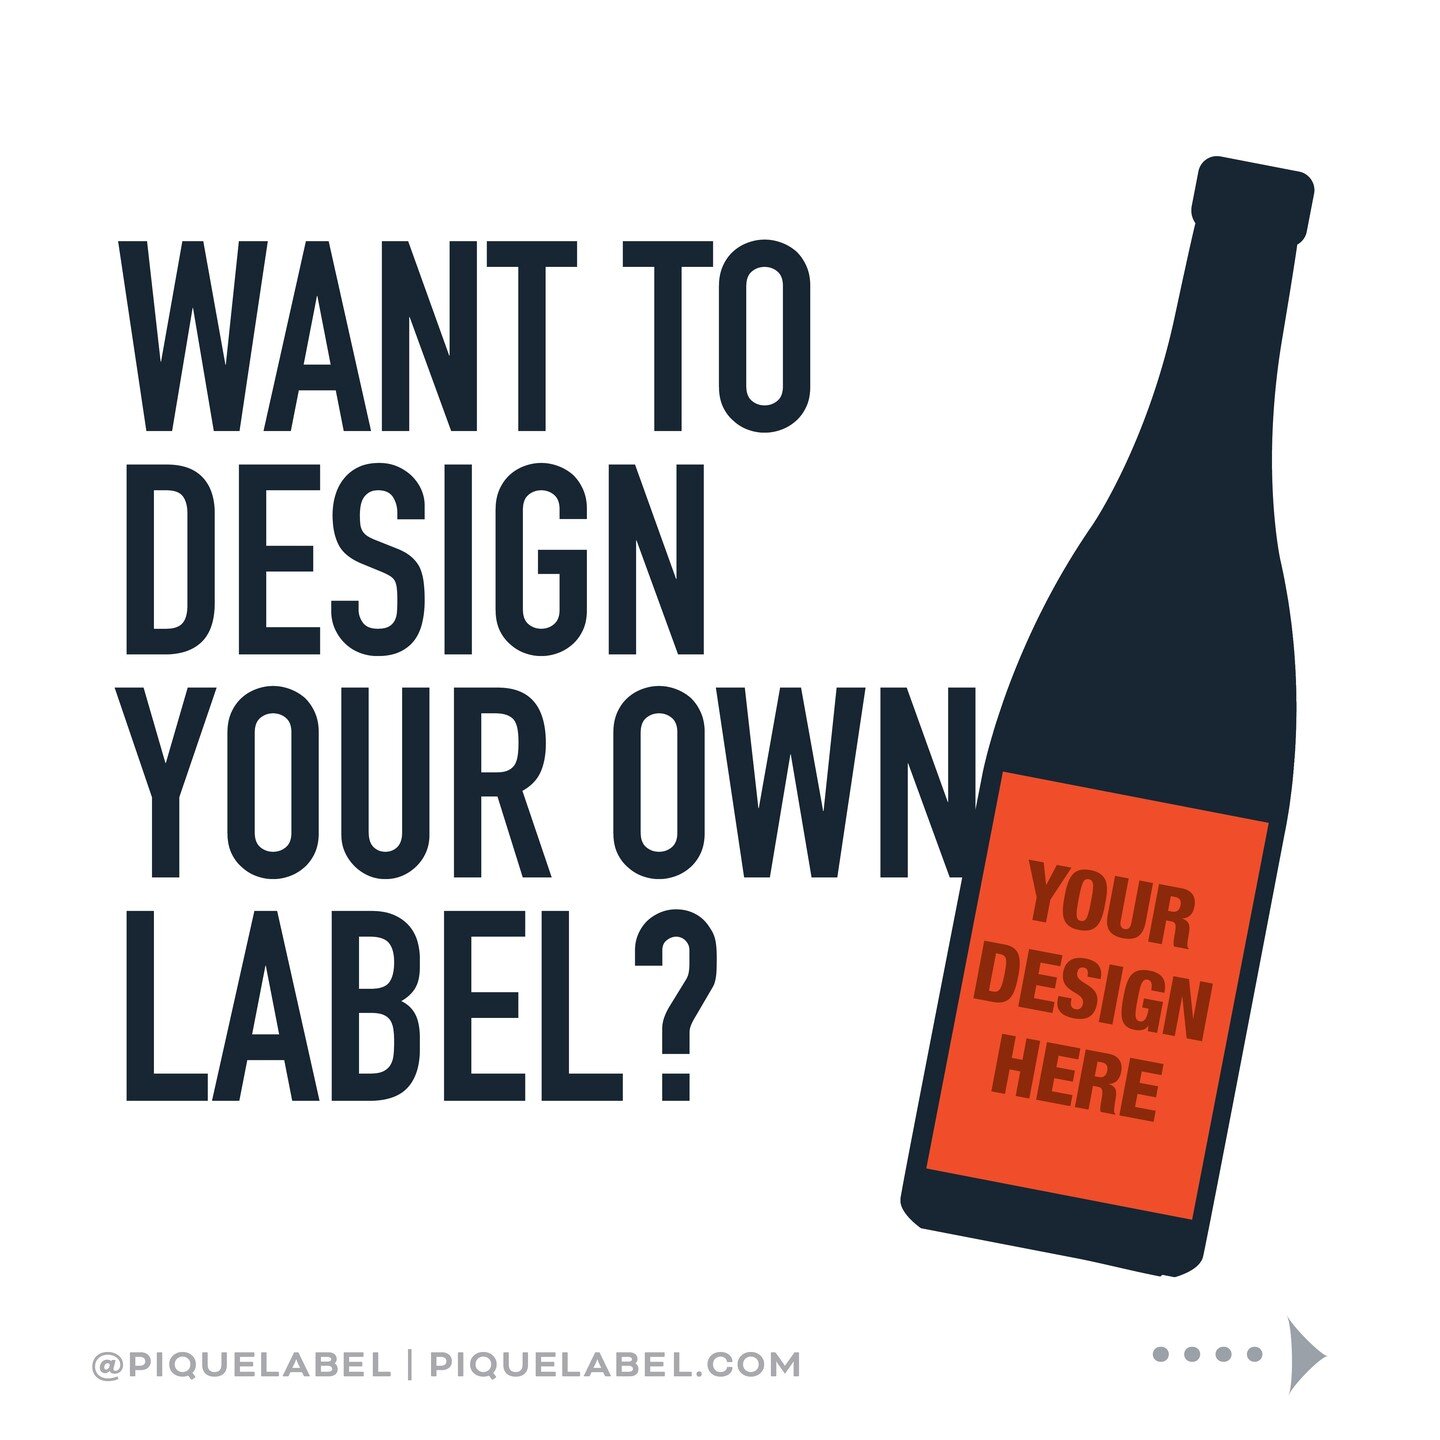 Our free label templates make&nbsp;it easy for you to create your own&nbsp;unique (almost&nbsp;from scratch) wine label!

Download them for free at www.piquelabel.com/templates

We provide two types of templates: Retail Templates and Shiner Templates